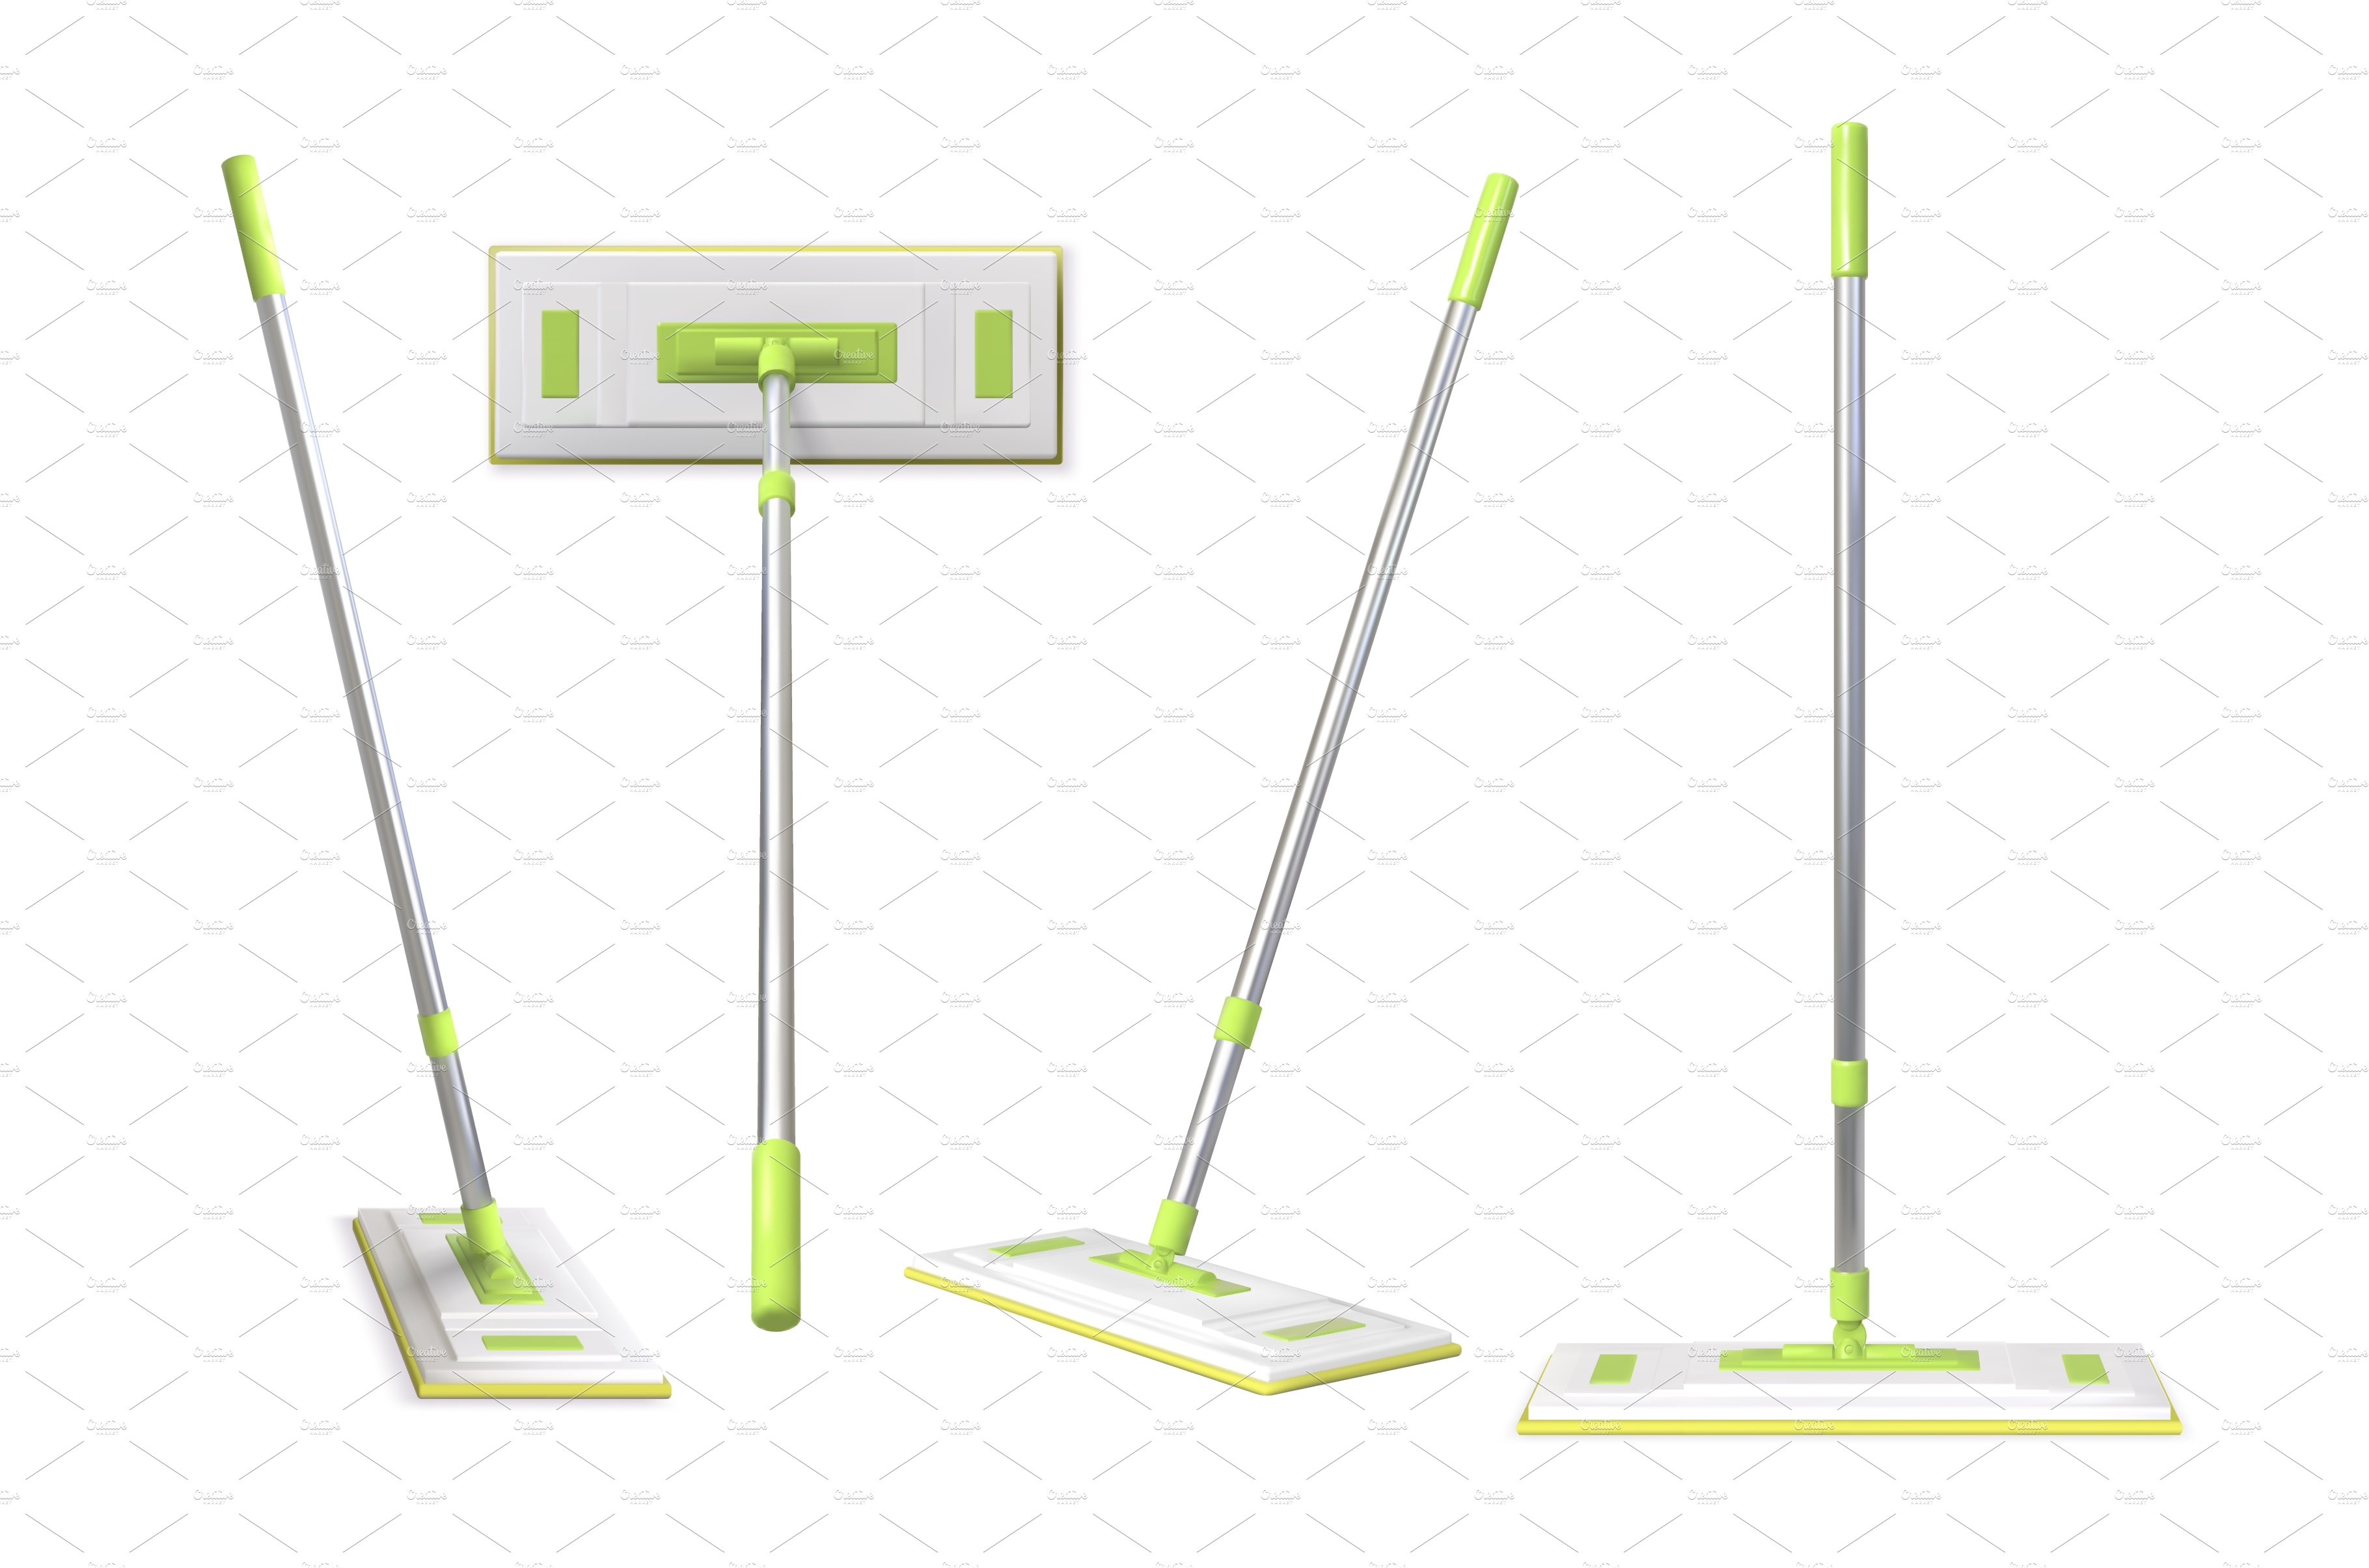 Realistic 3d floor cleaning mop with cover image.